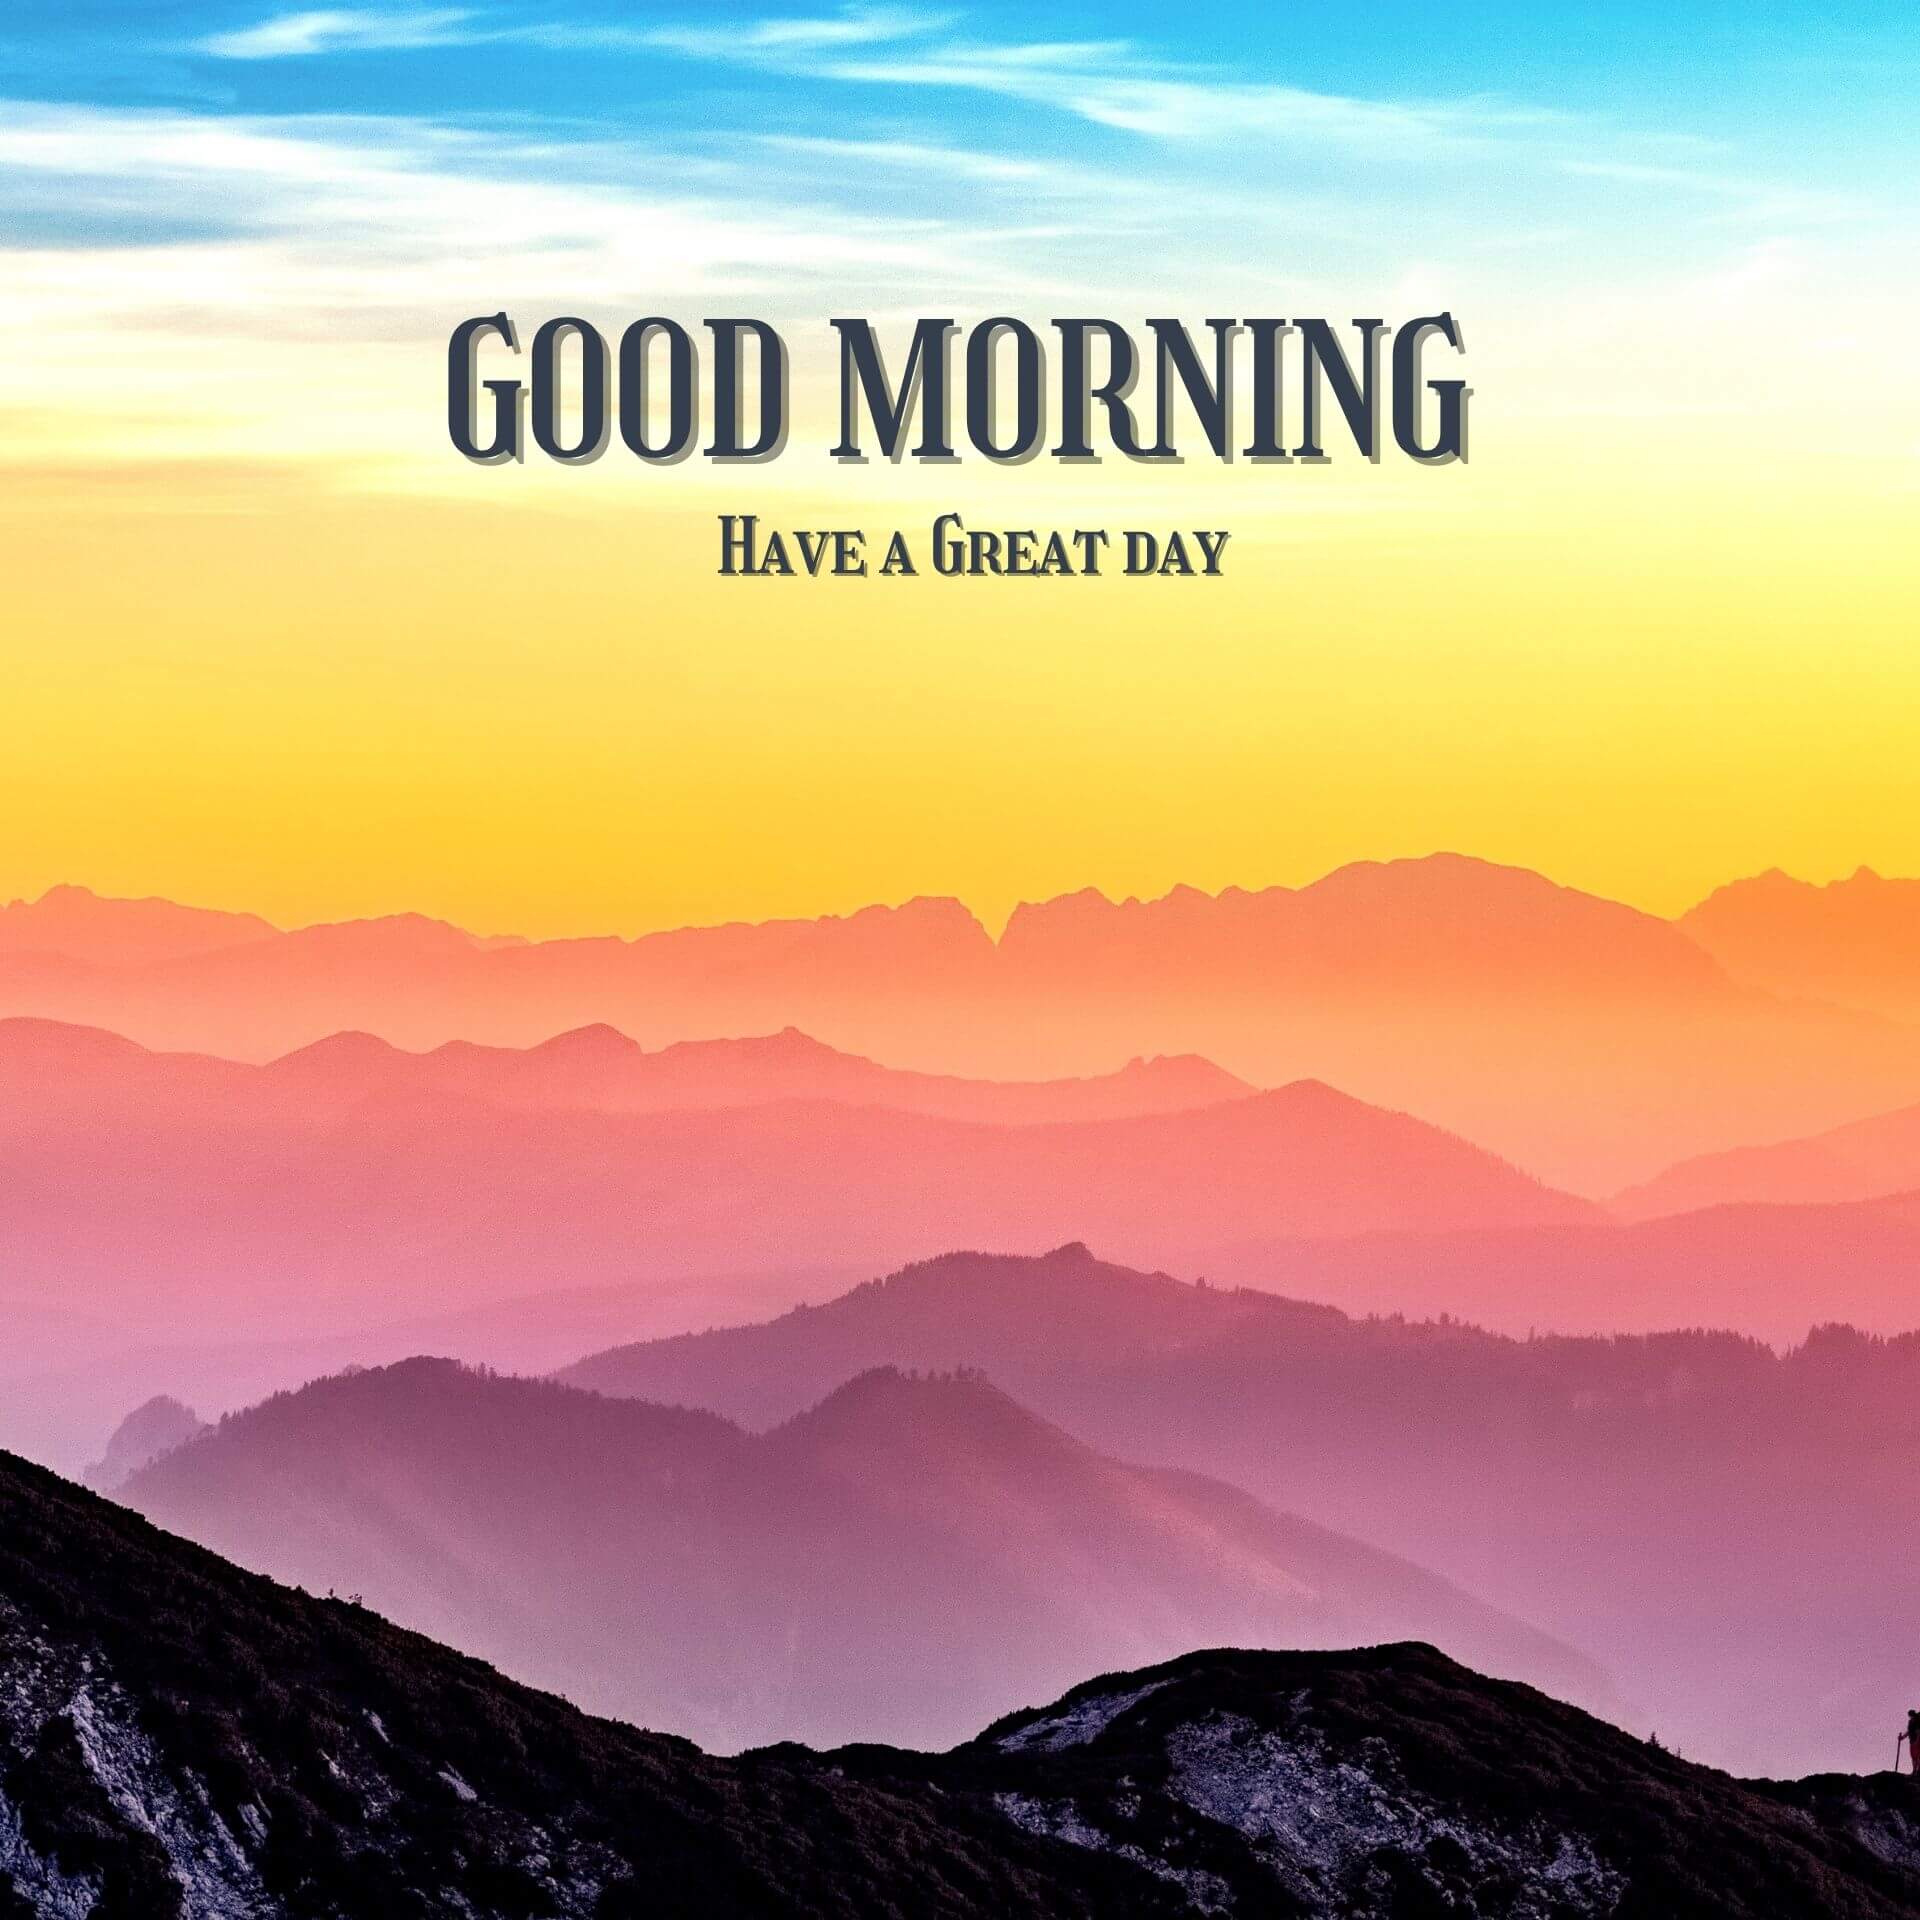 Good morning have a nice day Wallpaper Pics Download for Whatsapp